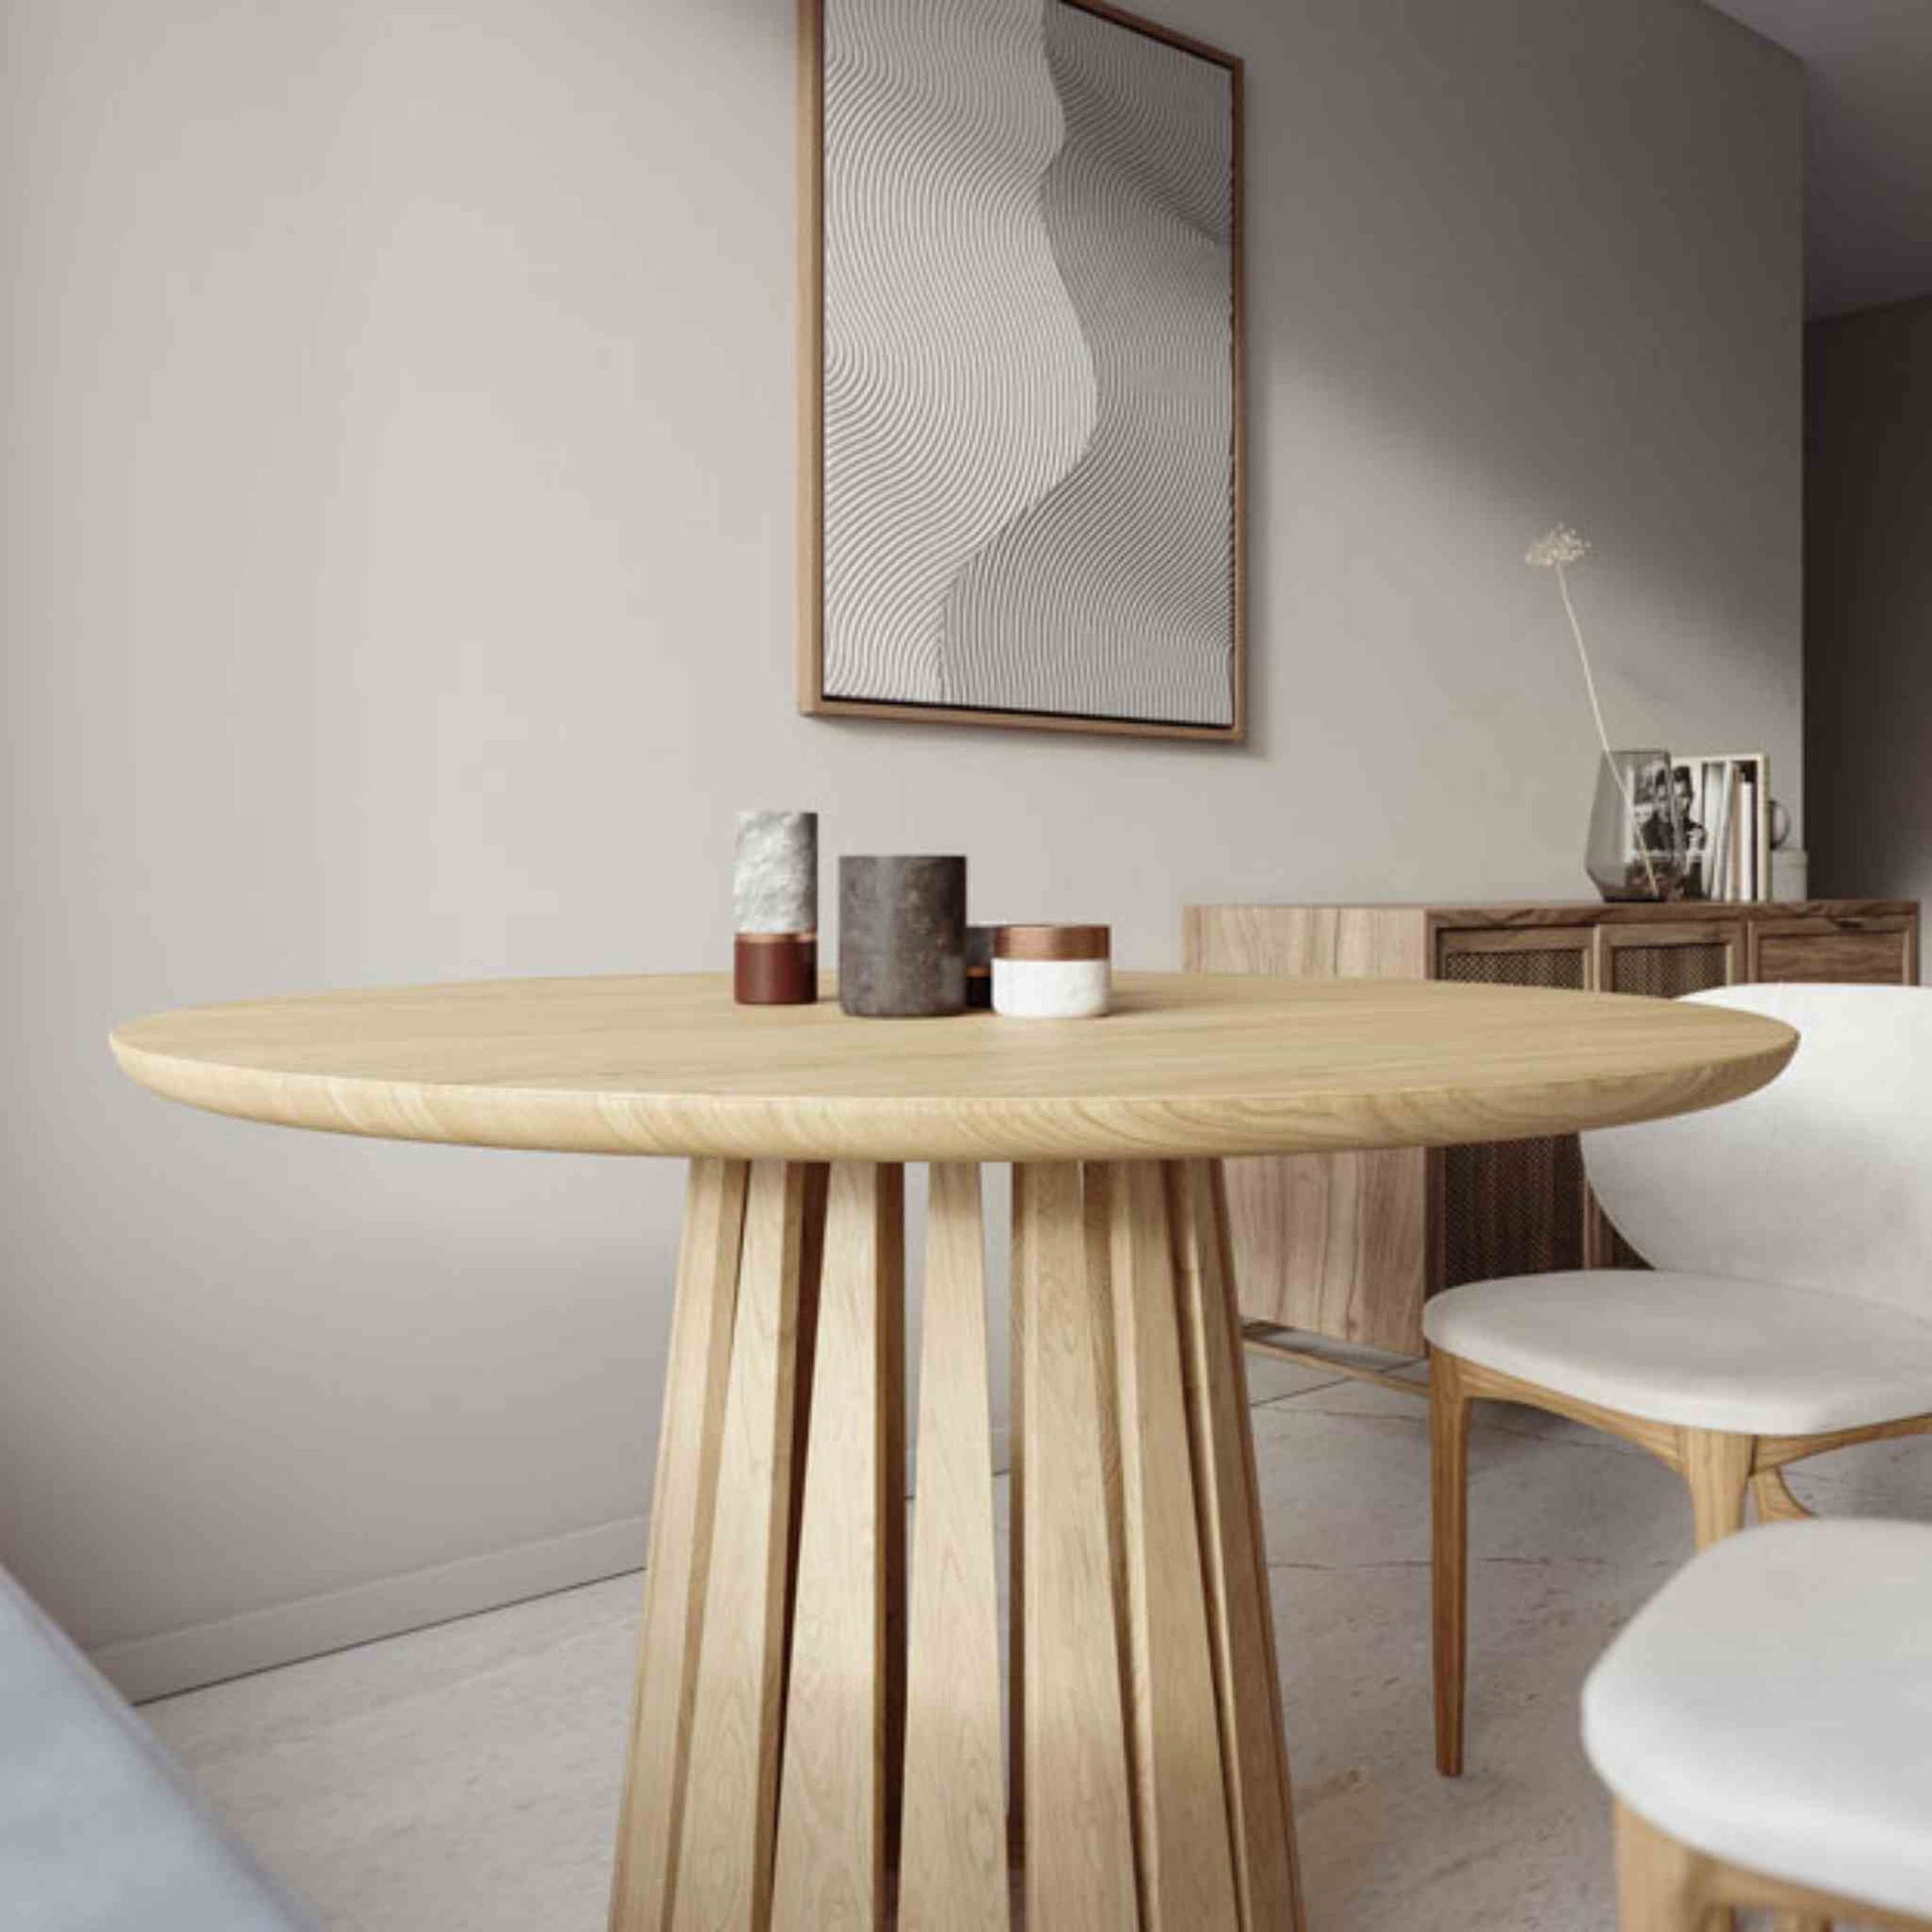 Interior arrangement with the Round Rigi table from ÉTAUDORÉ in solid oak wood with a beautiful base